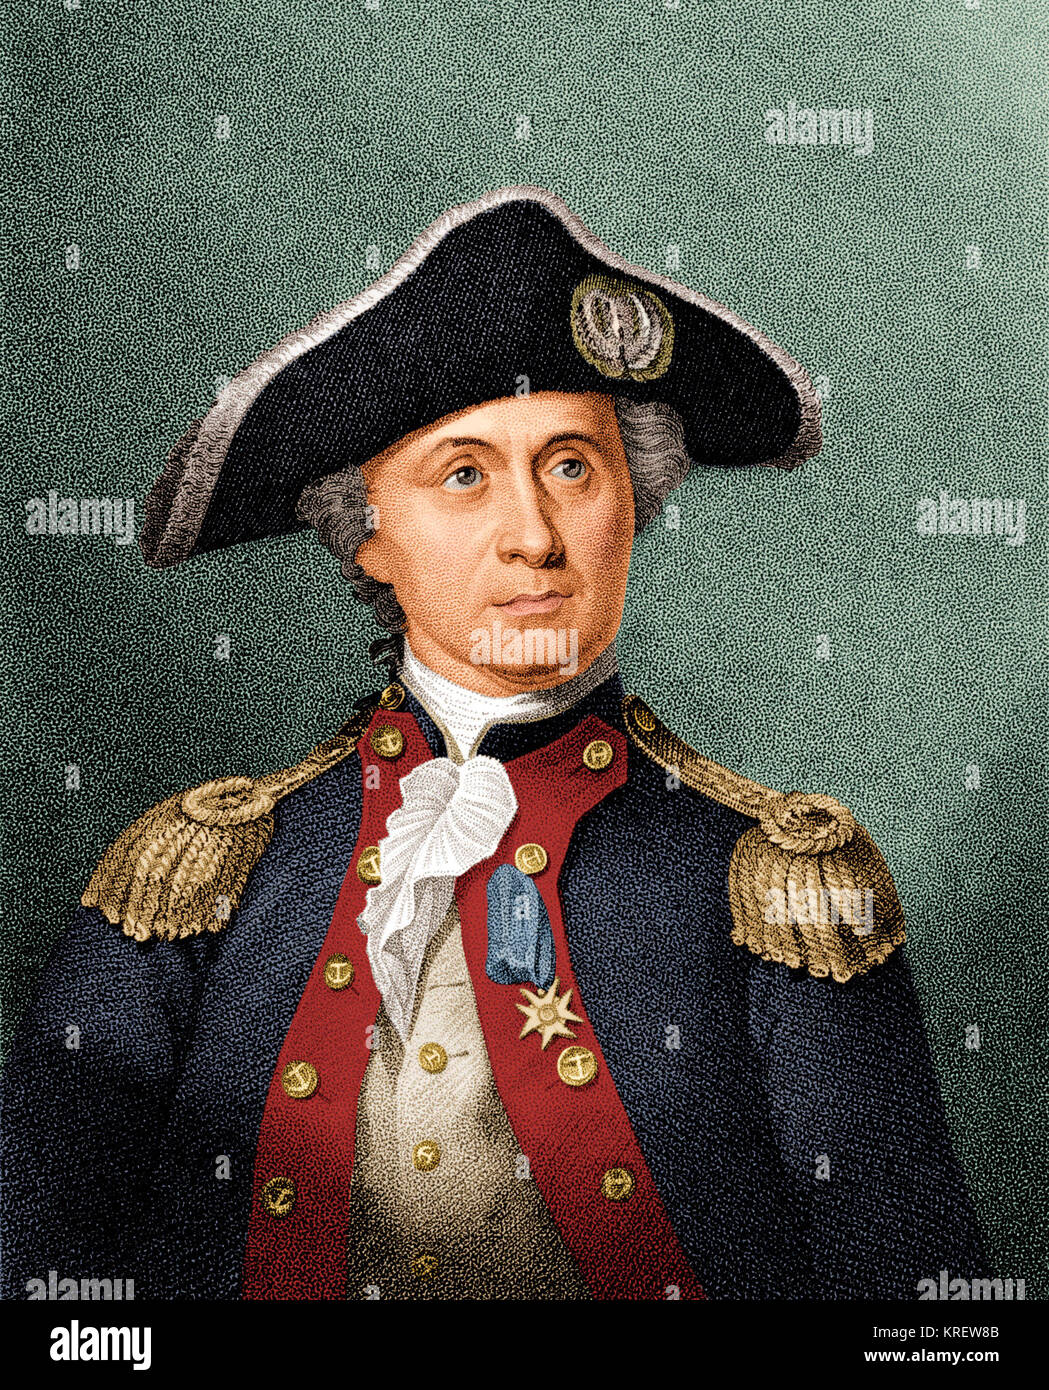 Engraved portrait of American naval officer John Paul Jones (1747 - 1792), late 1700s. During the American Revolutionary War, Jones commanded the US flagship 'Bonhomme Richard' in the naval defeat of the British ship 'Serapis' on September 23, 1779. The engraving is based on an 1890 painting by George Bagby Matthews. (Photo by Stock Montage/Getty Images) Stock Photo